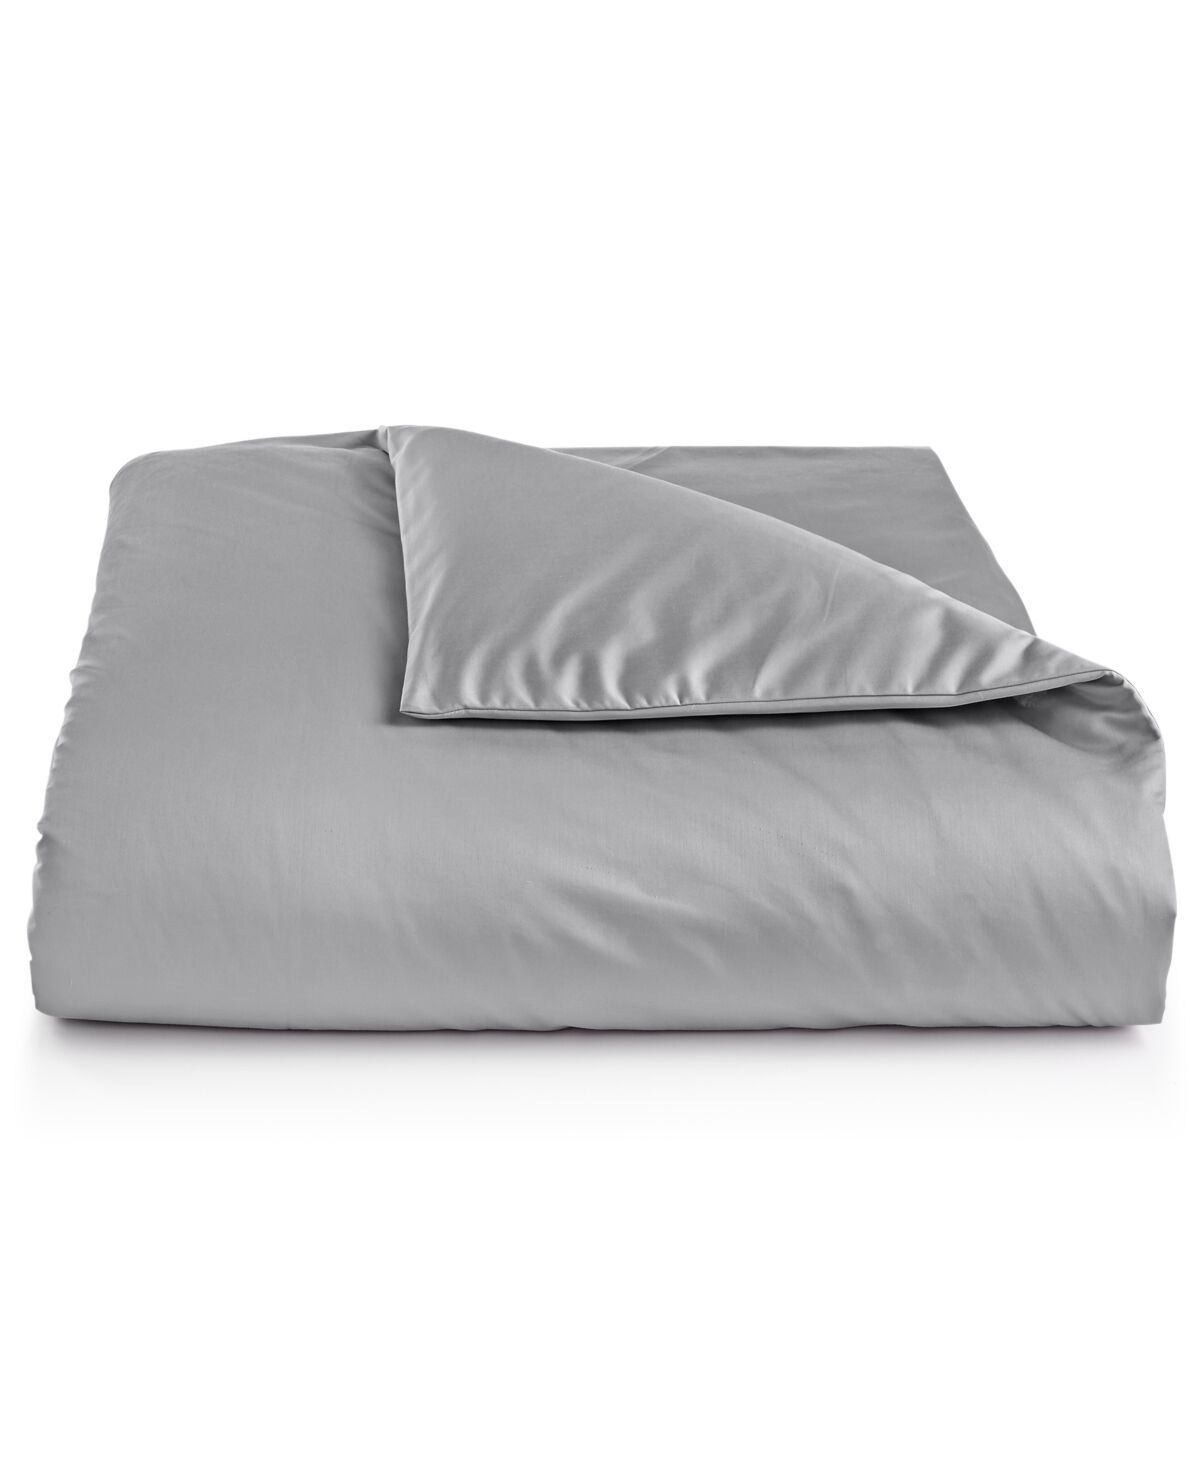 Charter Club Damask 550 Thread Count 100% Cotton 3-Pc. Duvet Cover Set, King, Created for Macy's - Smoke (Grey)